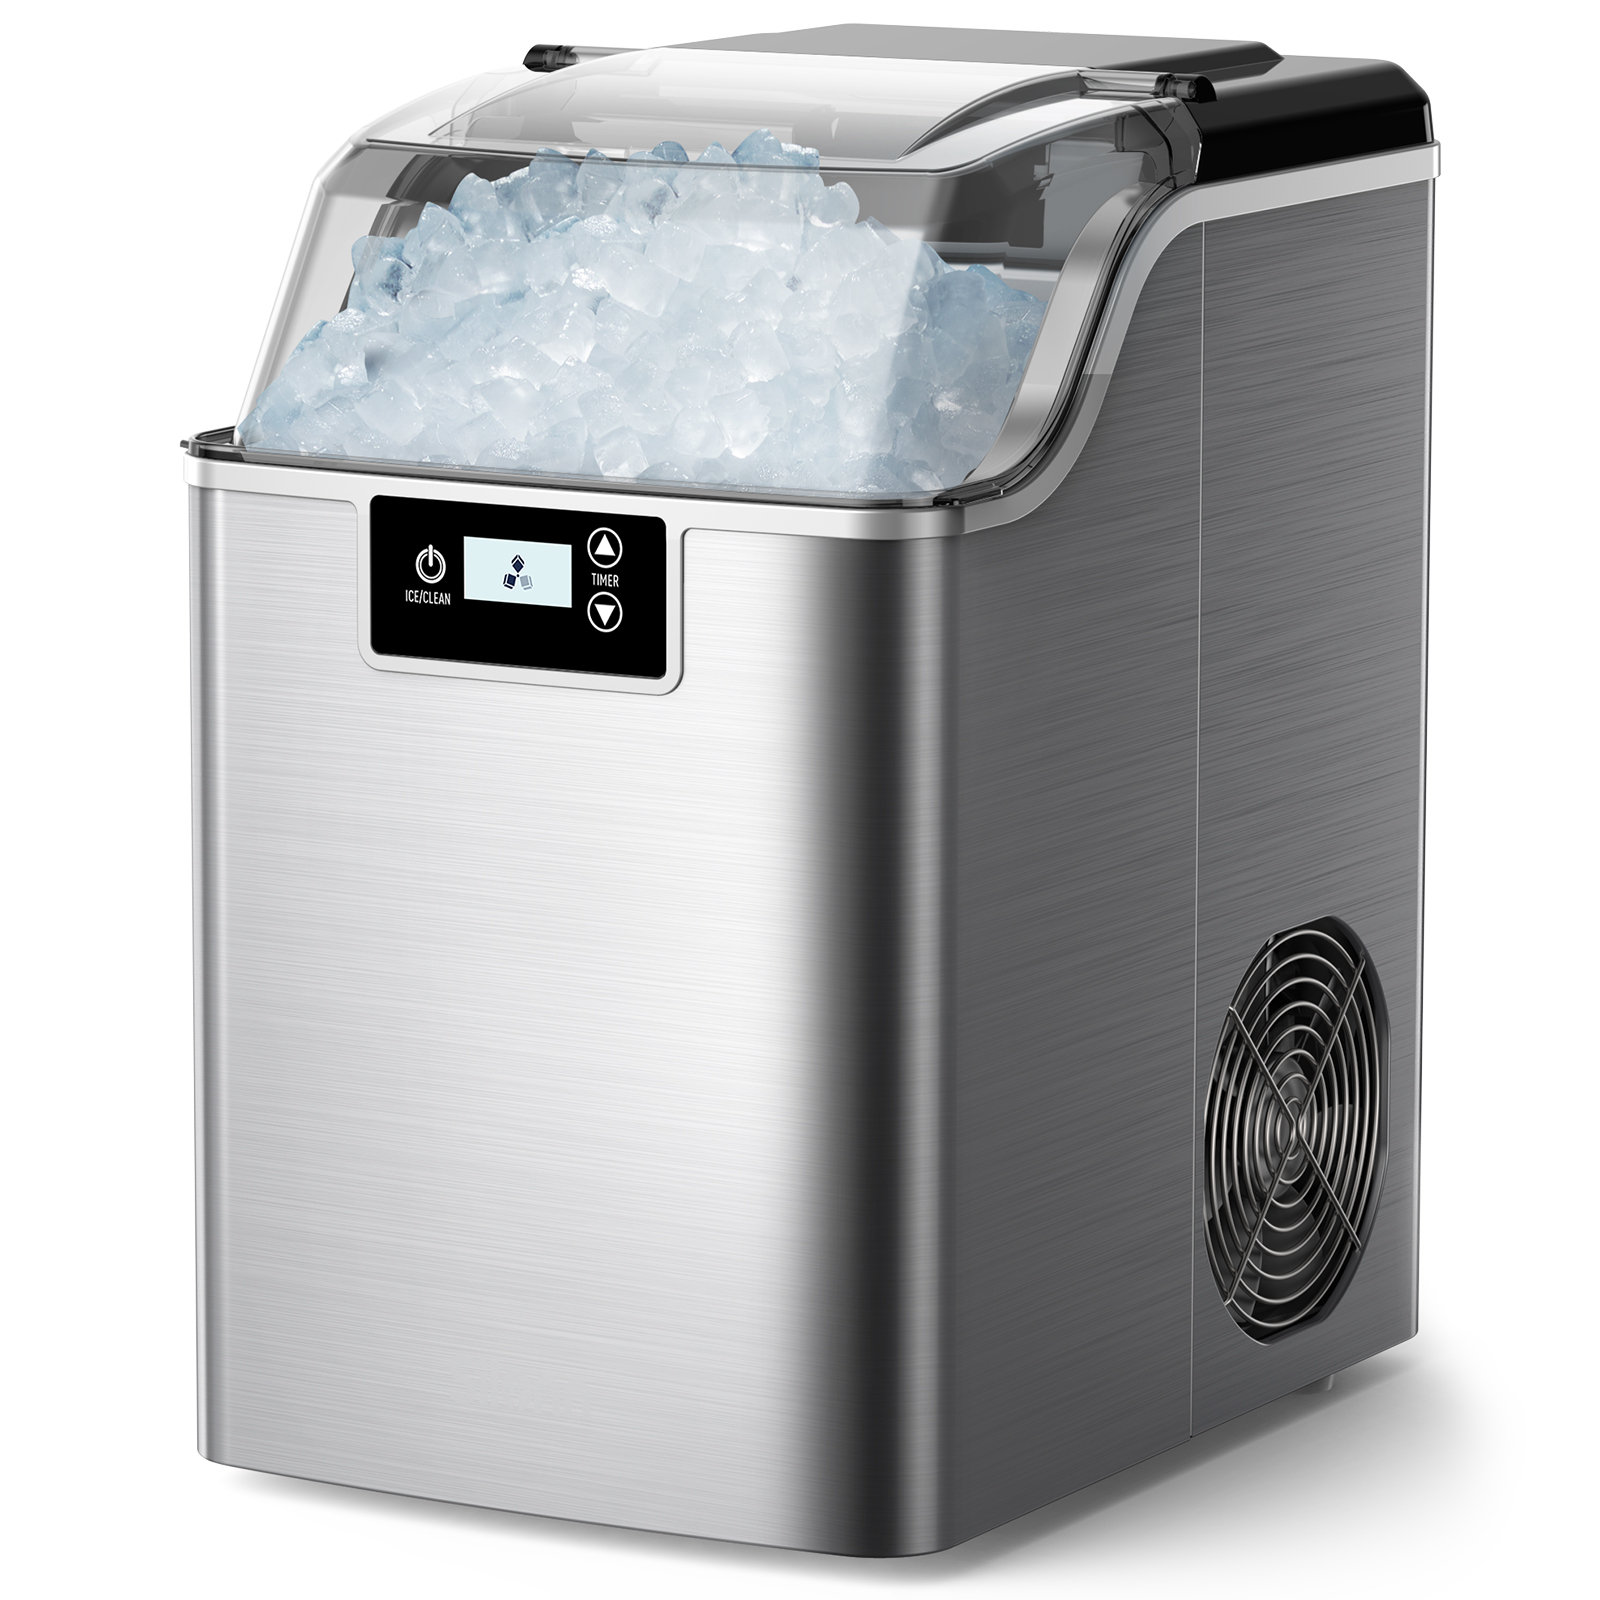  Newair Nugget Ice Maker, Sonic Speed Countertop Crunchy Ice  Pellet Machine 45 lbs. of Ice a Day, Stainless Steel, Self-Cleaning  Function and BPA-Free Parts, Perfect for Home, Kitchen, and More 